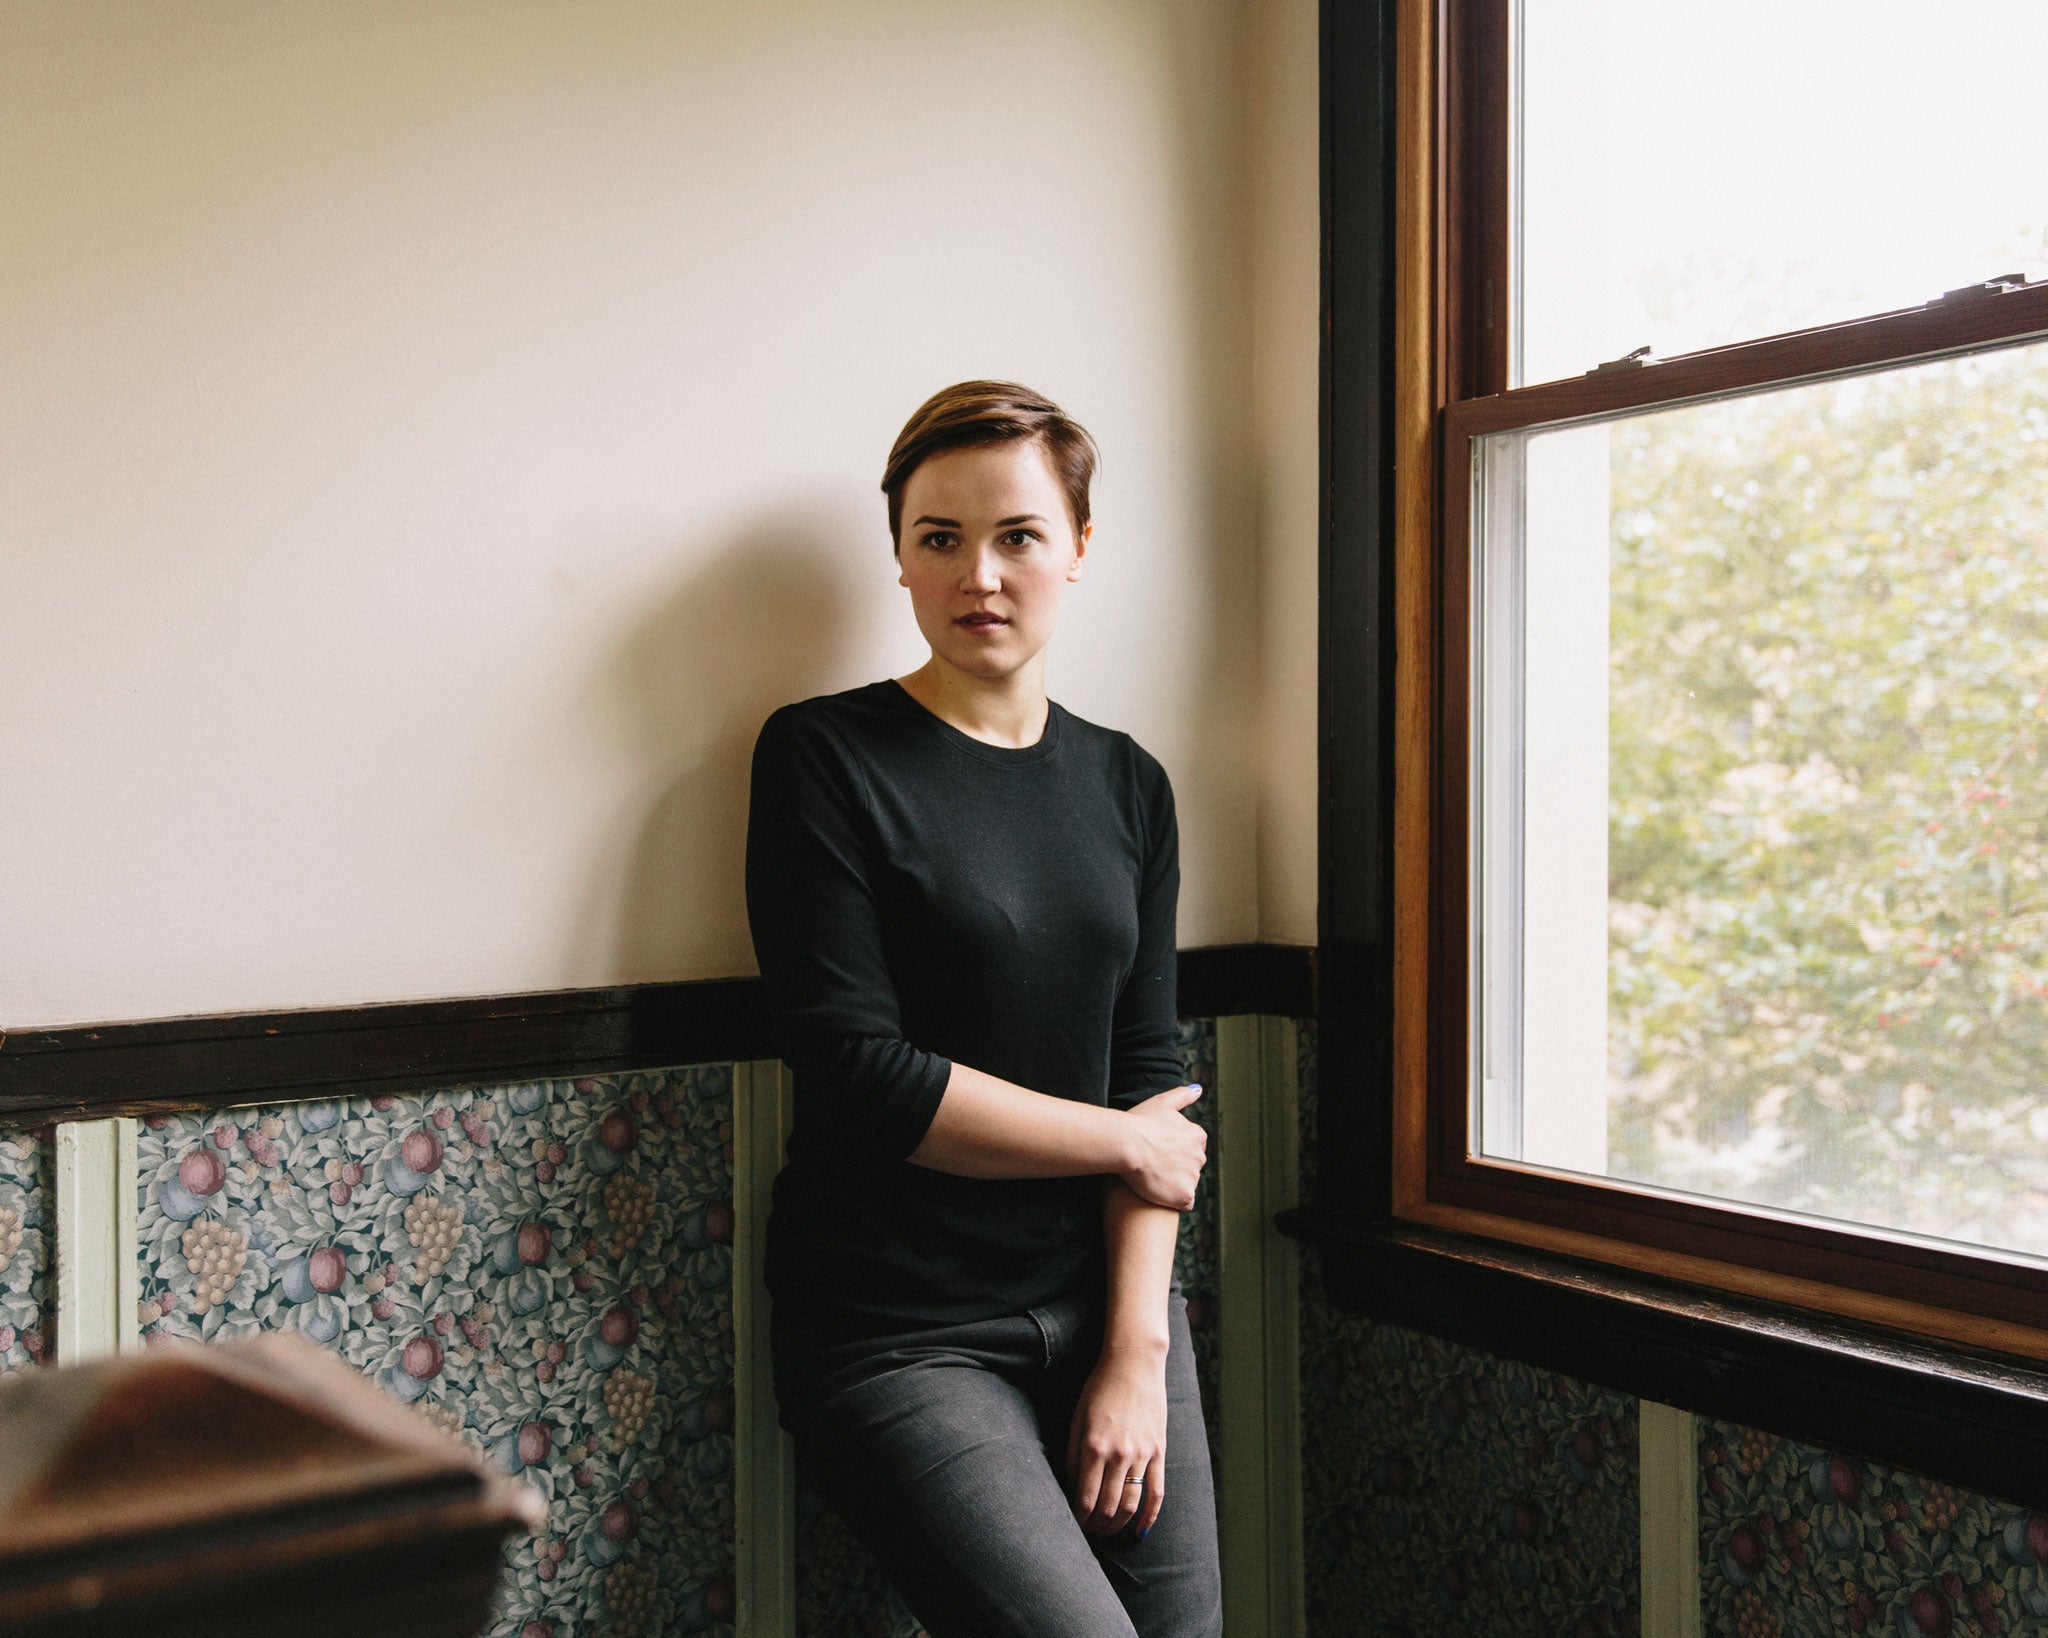 For Her First Adult Novel, Veronica Roth Finds Freedom in a Female